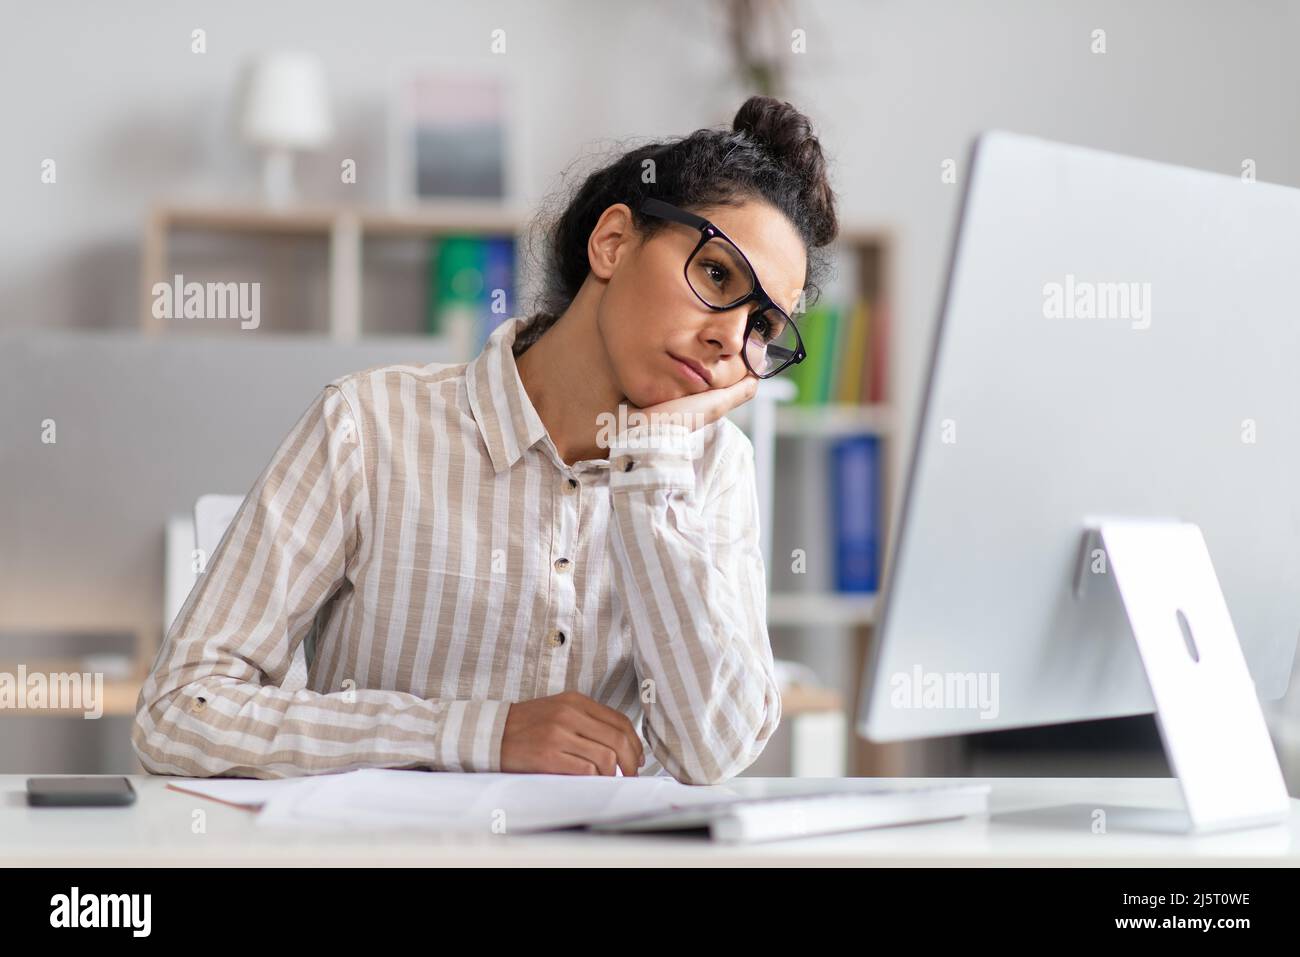 Portrait of bored businesswoman sitting at desk, leaning head on hand and looking at computer monitor Stock Photo